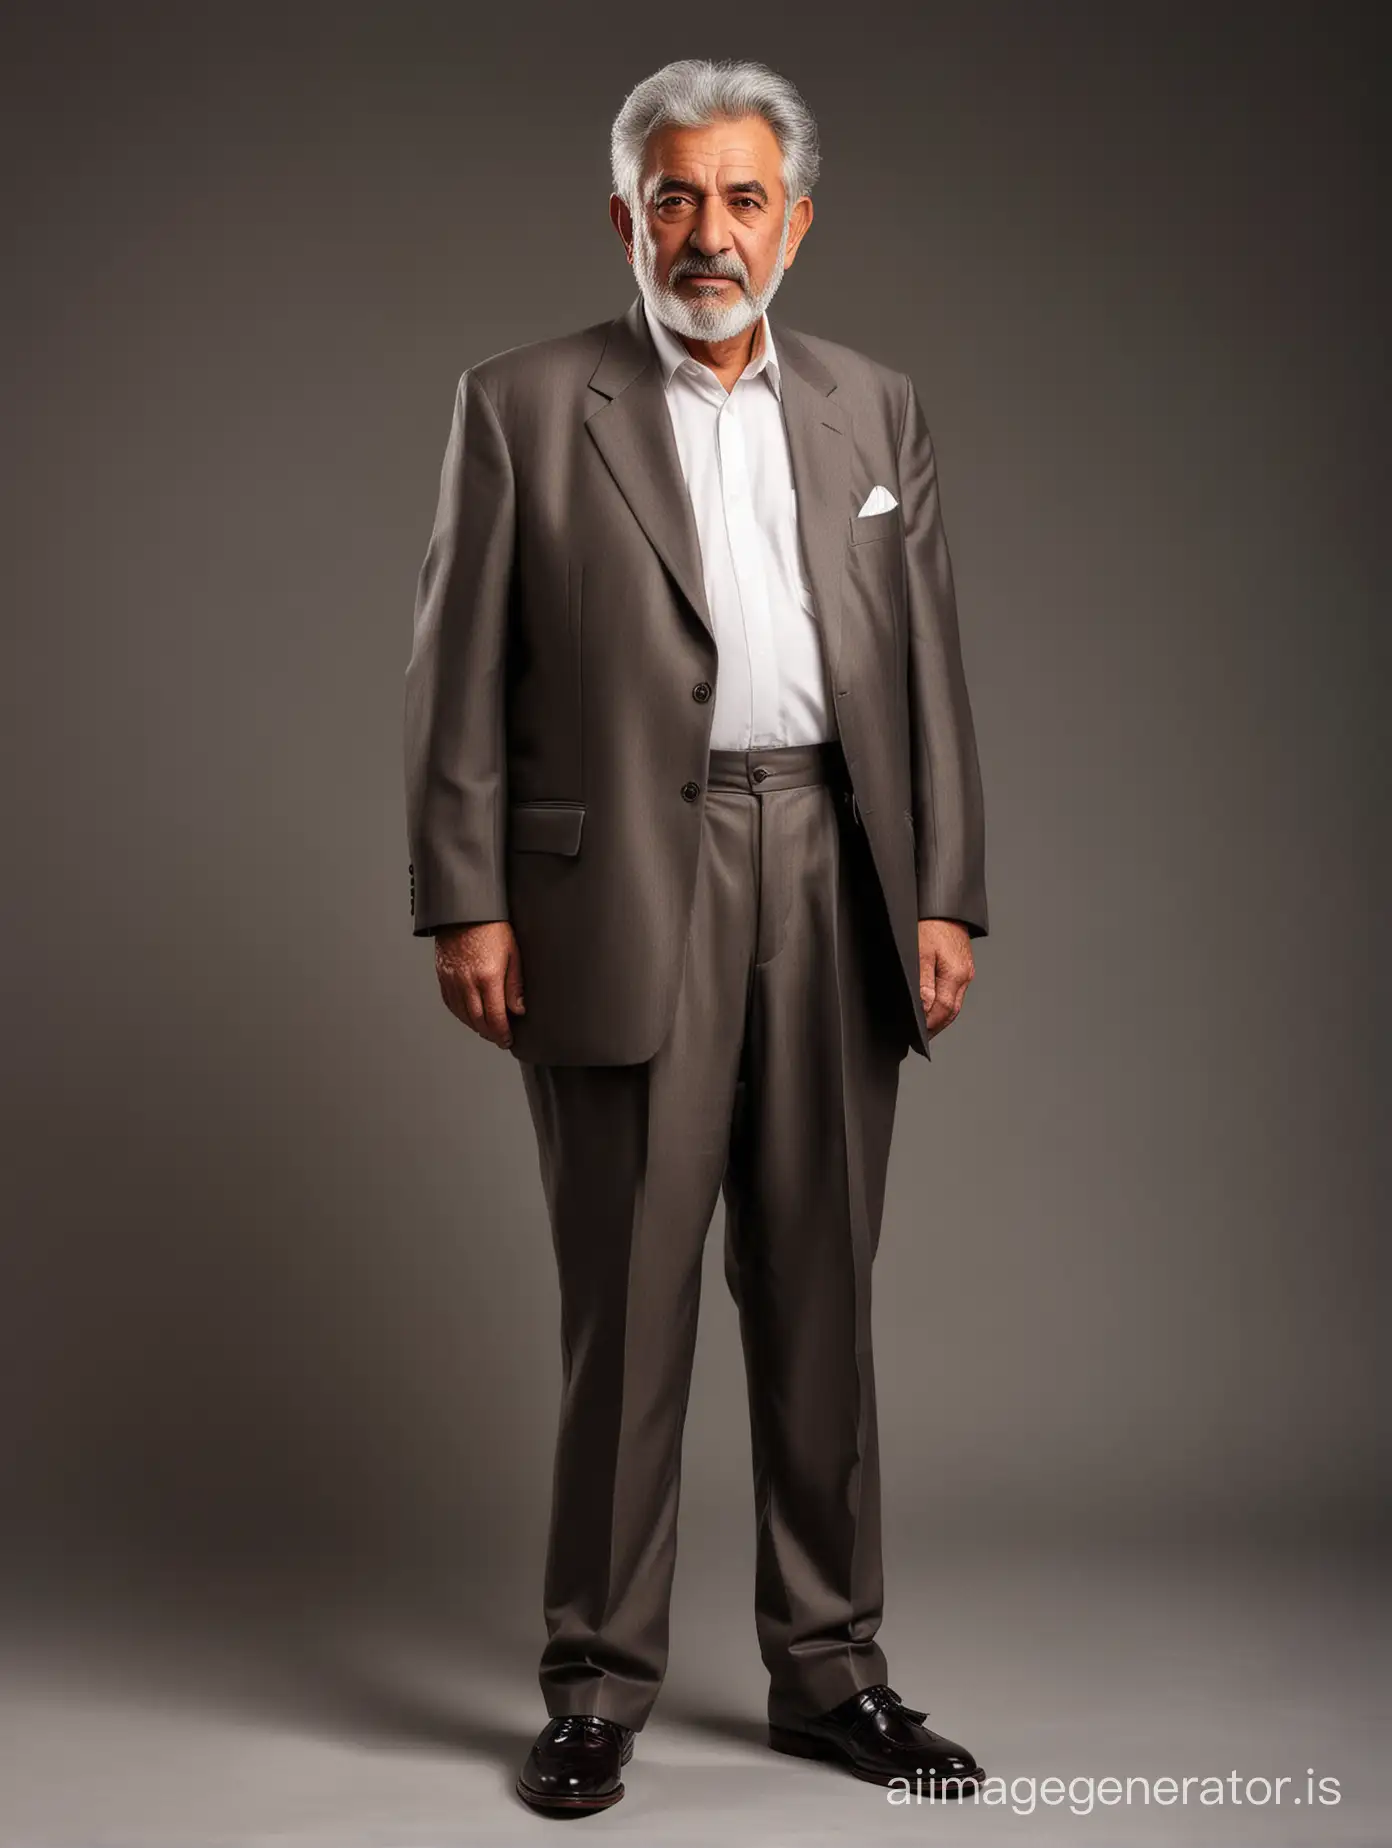 iranian  lux fat old man 70 years old, shot height, wearing dark brown suits, white shirt, black shoes, grey  hair,  full body shot, full body shot, fantasy  light cream solid background, dramatic lighting